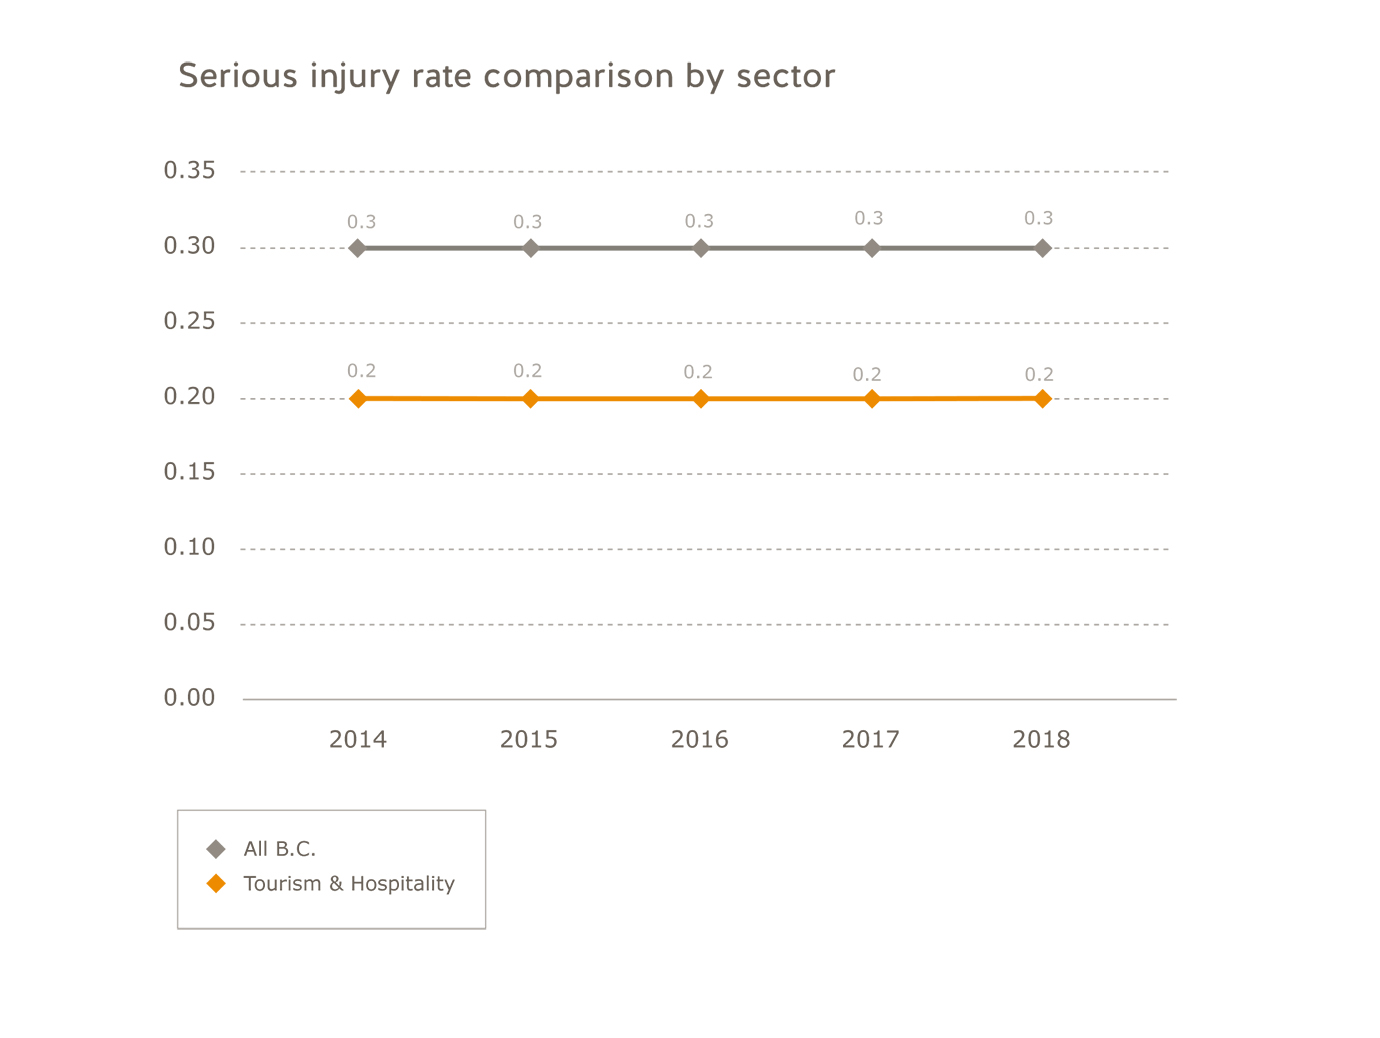 Tourism and hospitality industry serious injury rate comparison by sector for 2014 to 2018. All B.C.: 2014=0.3; 2015=0.3; 2016=0.3; 2017=0.3/2018=0.3. Tourism and hospitality: 2014=0.2; 2015=0.2; 2016=0.2; 2017=0.2; 2018=0.2